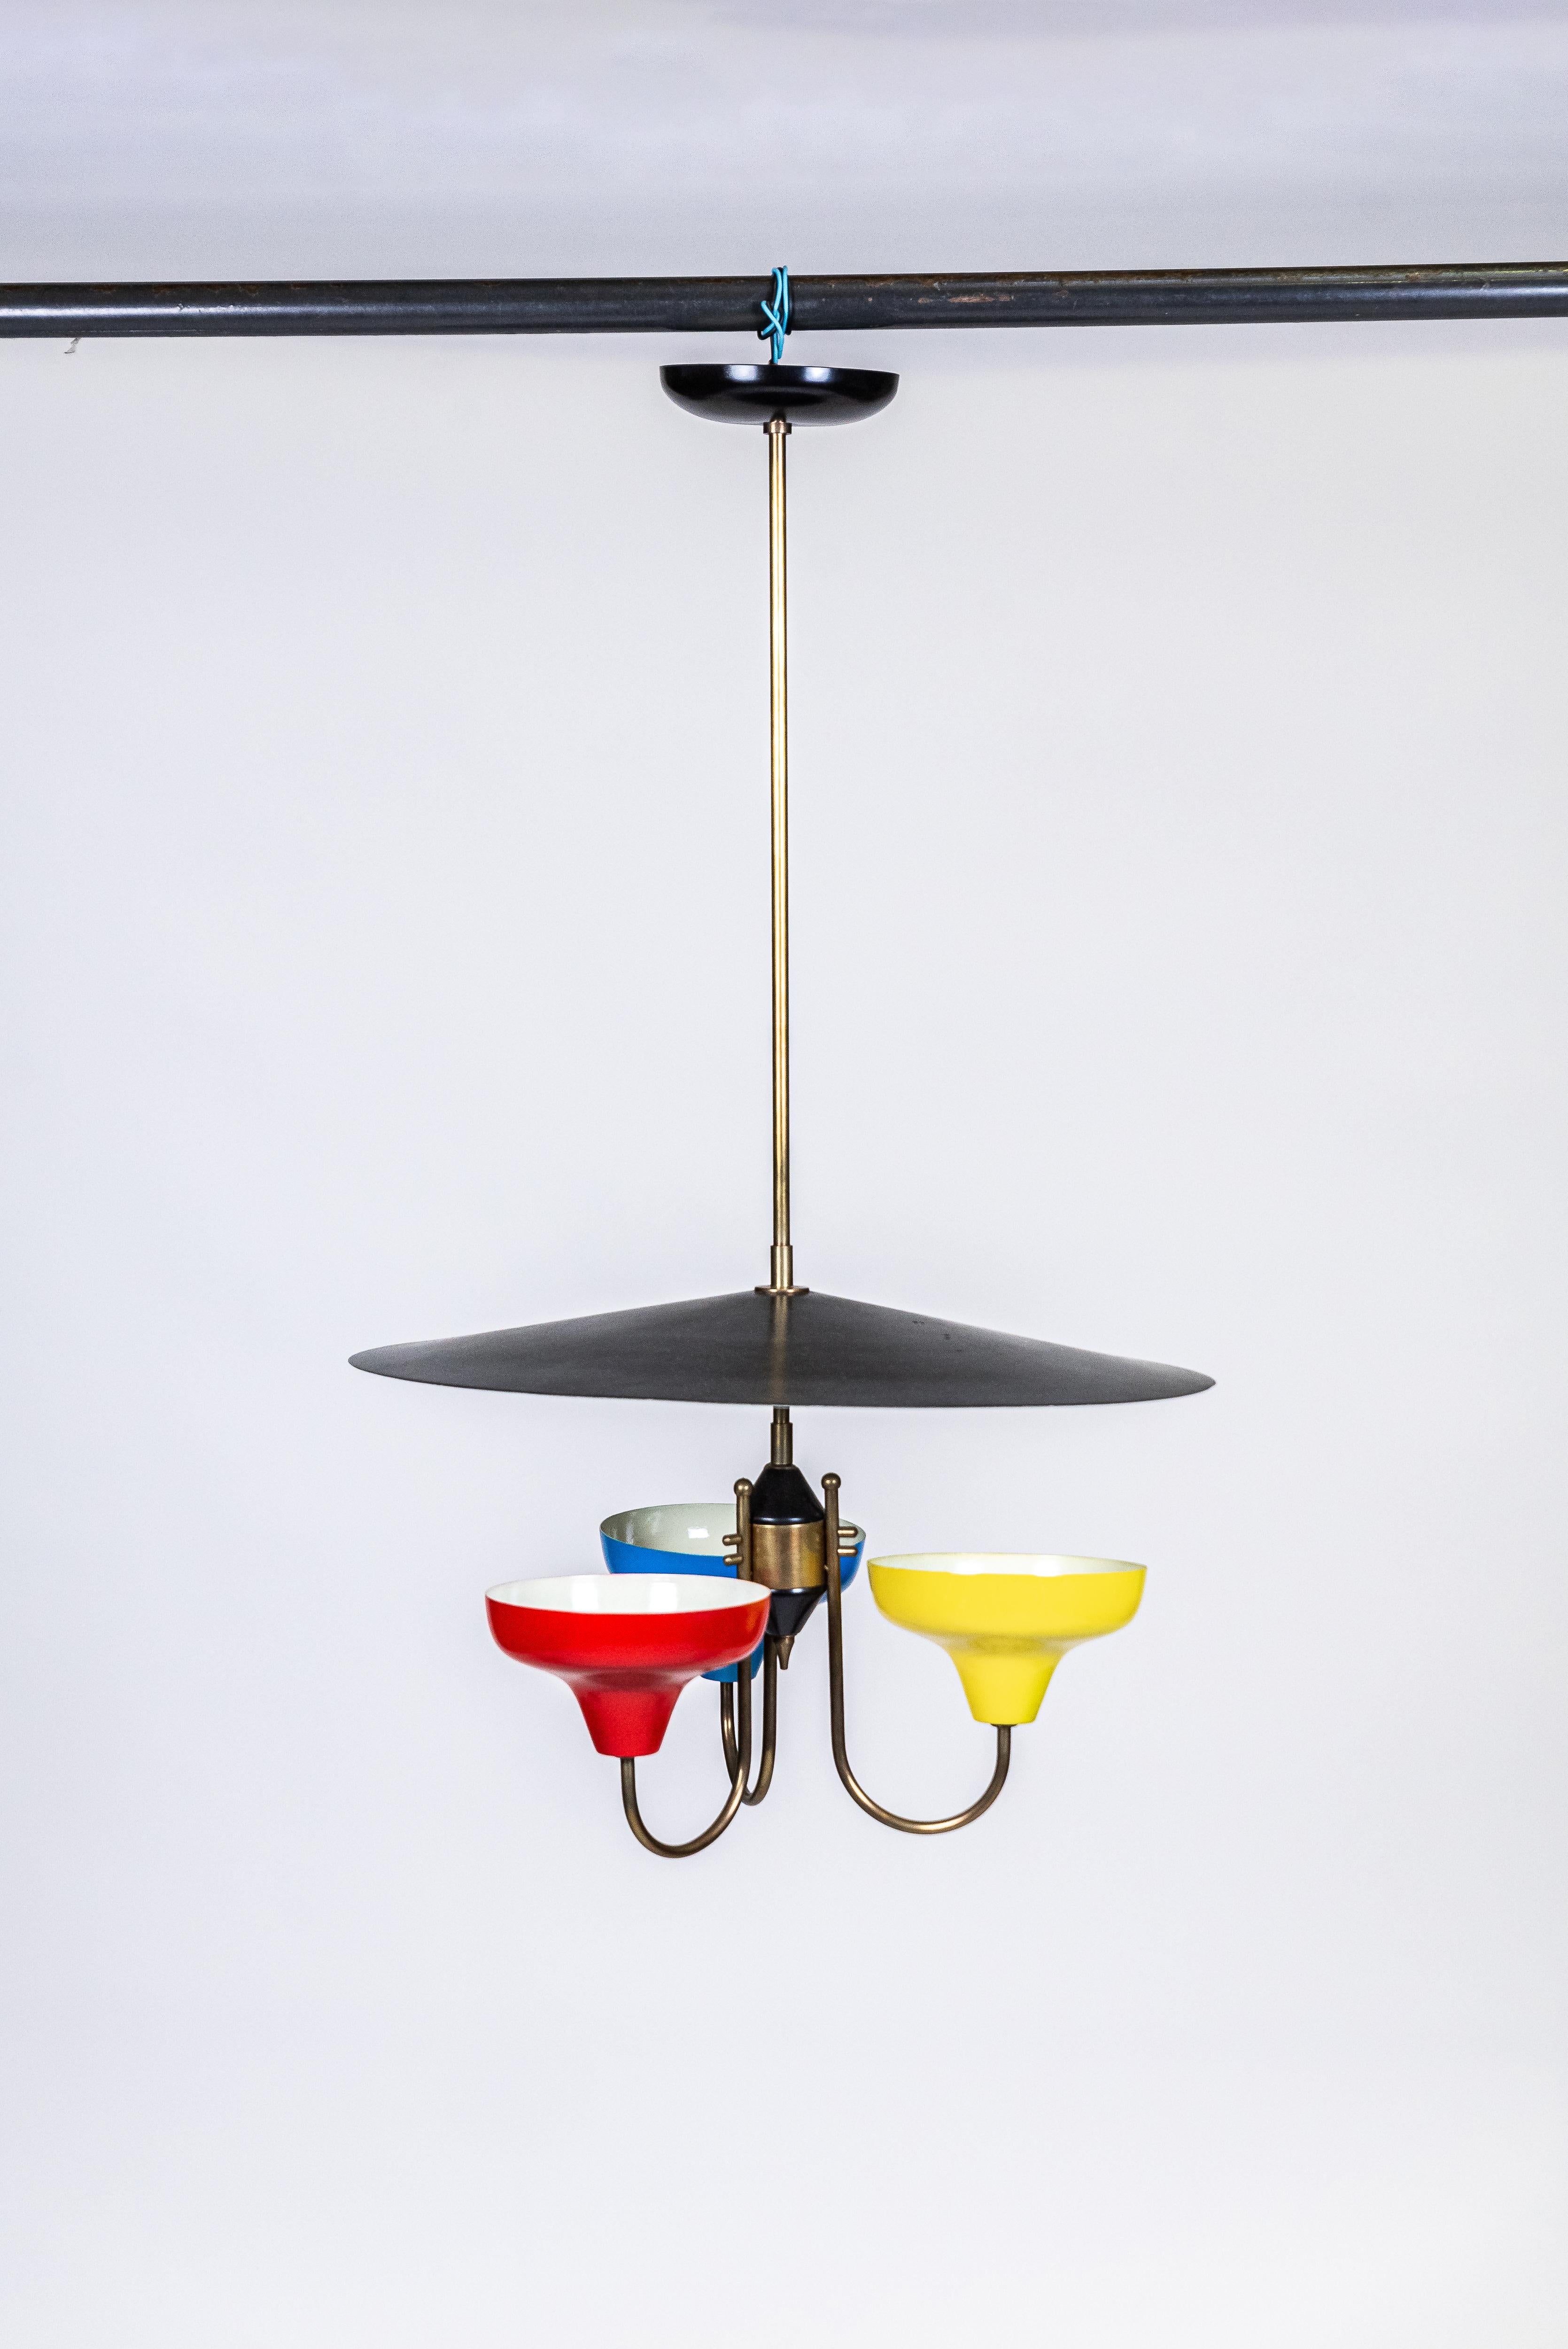 Brazilian design.
Chandelier, c. 1950.
Metal and brass.
Metal suspension and 3 cups in red, blue and yellow colors; tray and dome in white and black, support and details in gilded brass. In working condition.